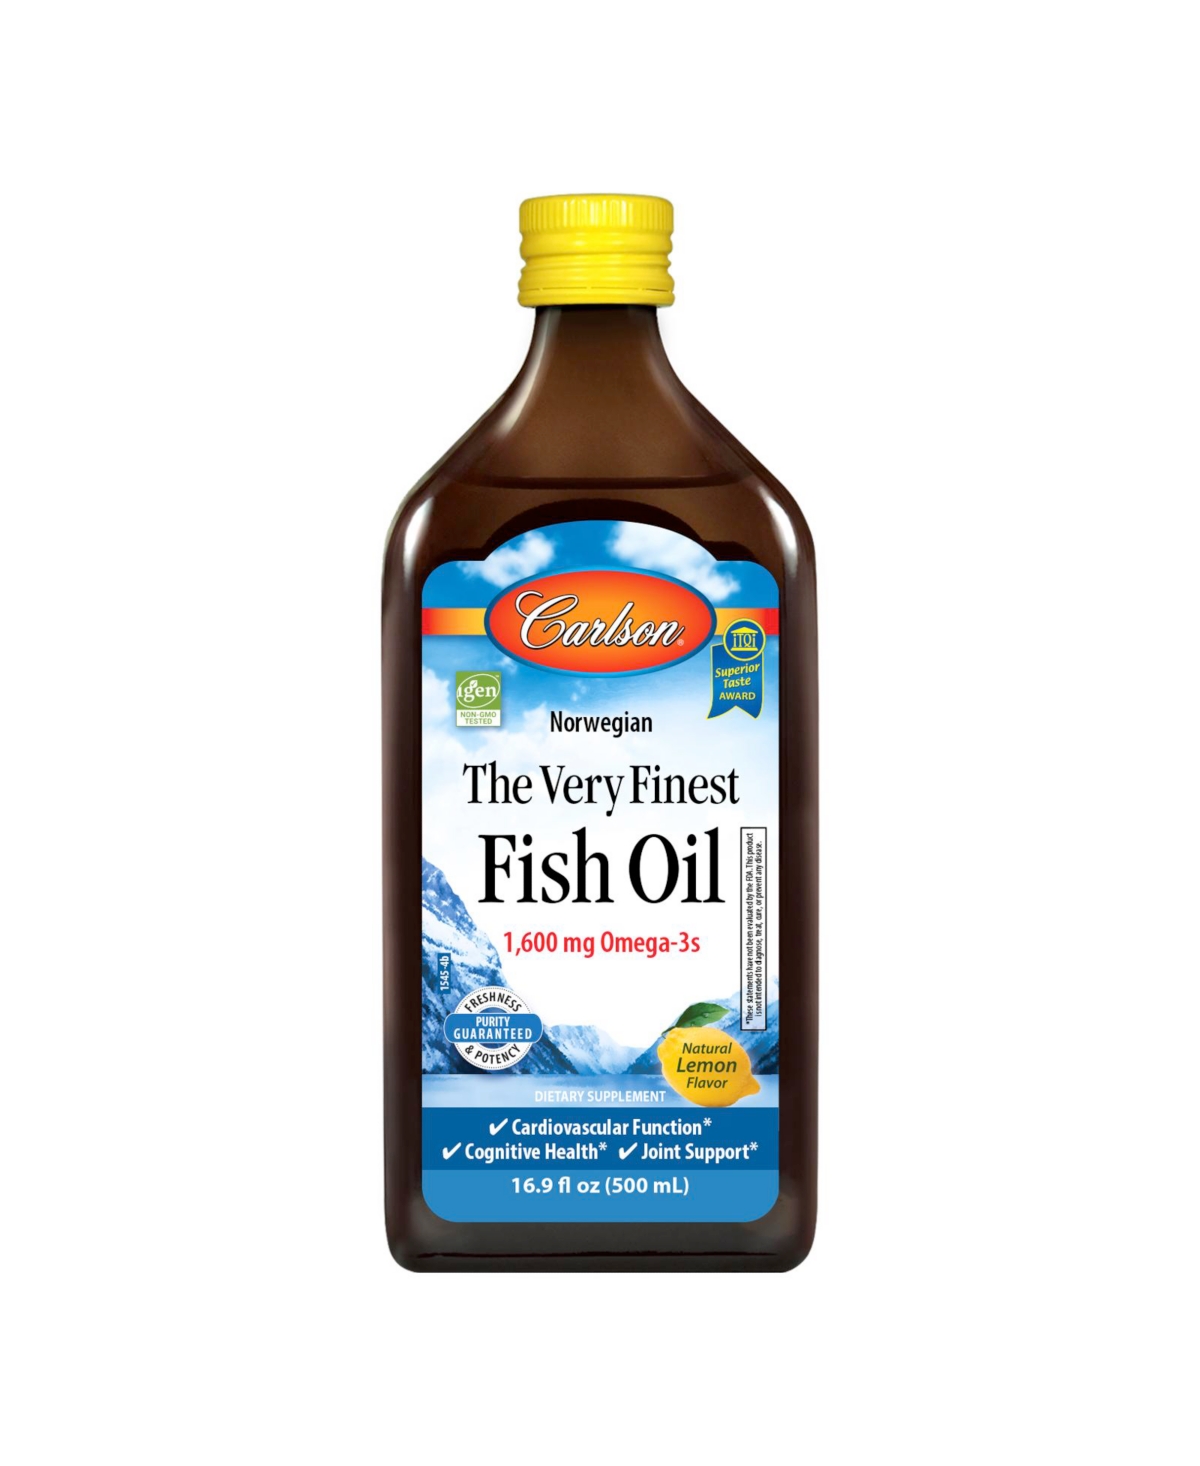 Carlson - The Very Finest Fish Oil, 1600 mg Omega-3s, Norwegian, Wild Caught, Sustainably Sourced, Lemon, 500 mL (16.9 Fl Oz)